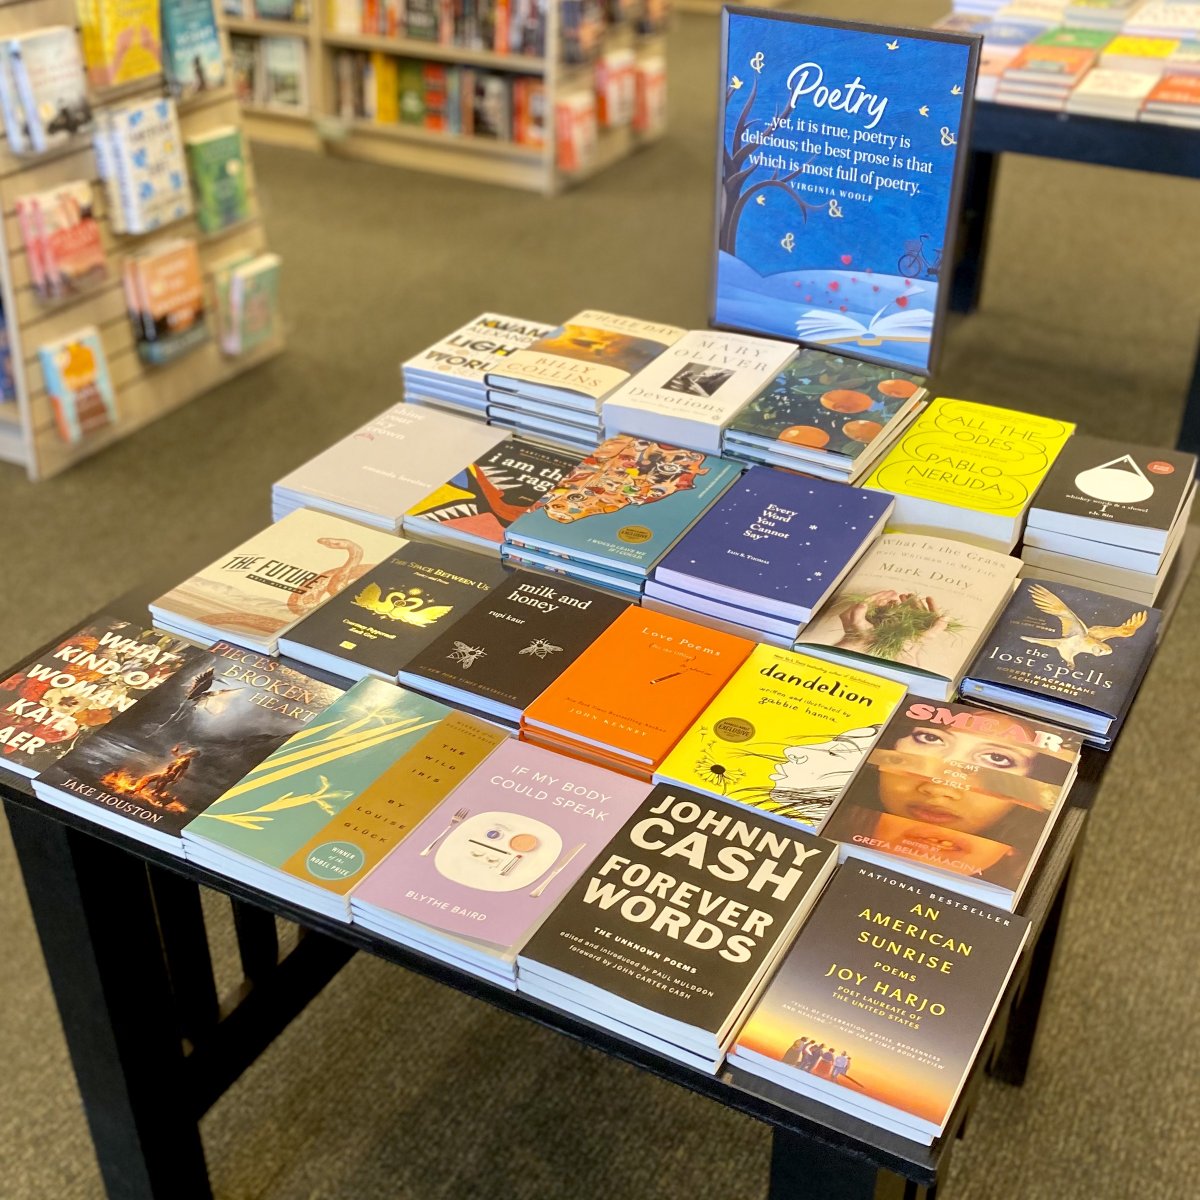 So many amazing poetry books released in 2020 — we can’t wait to see all the new releases 2021 brings! #Poetry #Poems #Books #BNTemecula #142BN #PoetryCollections